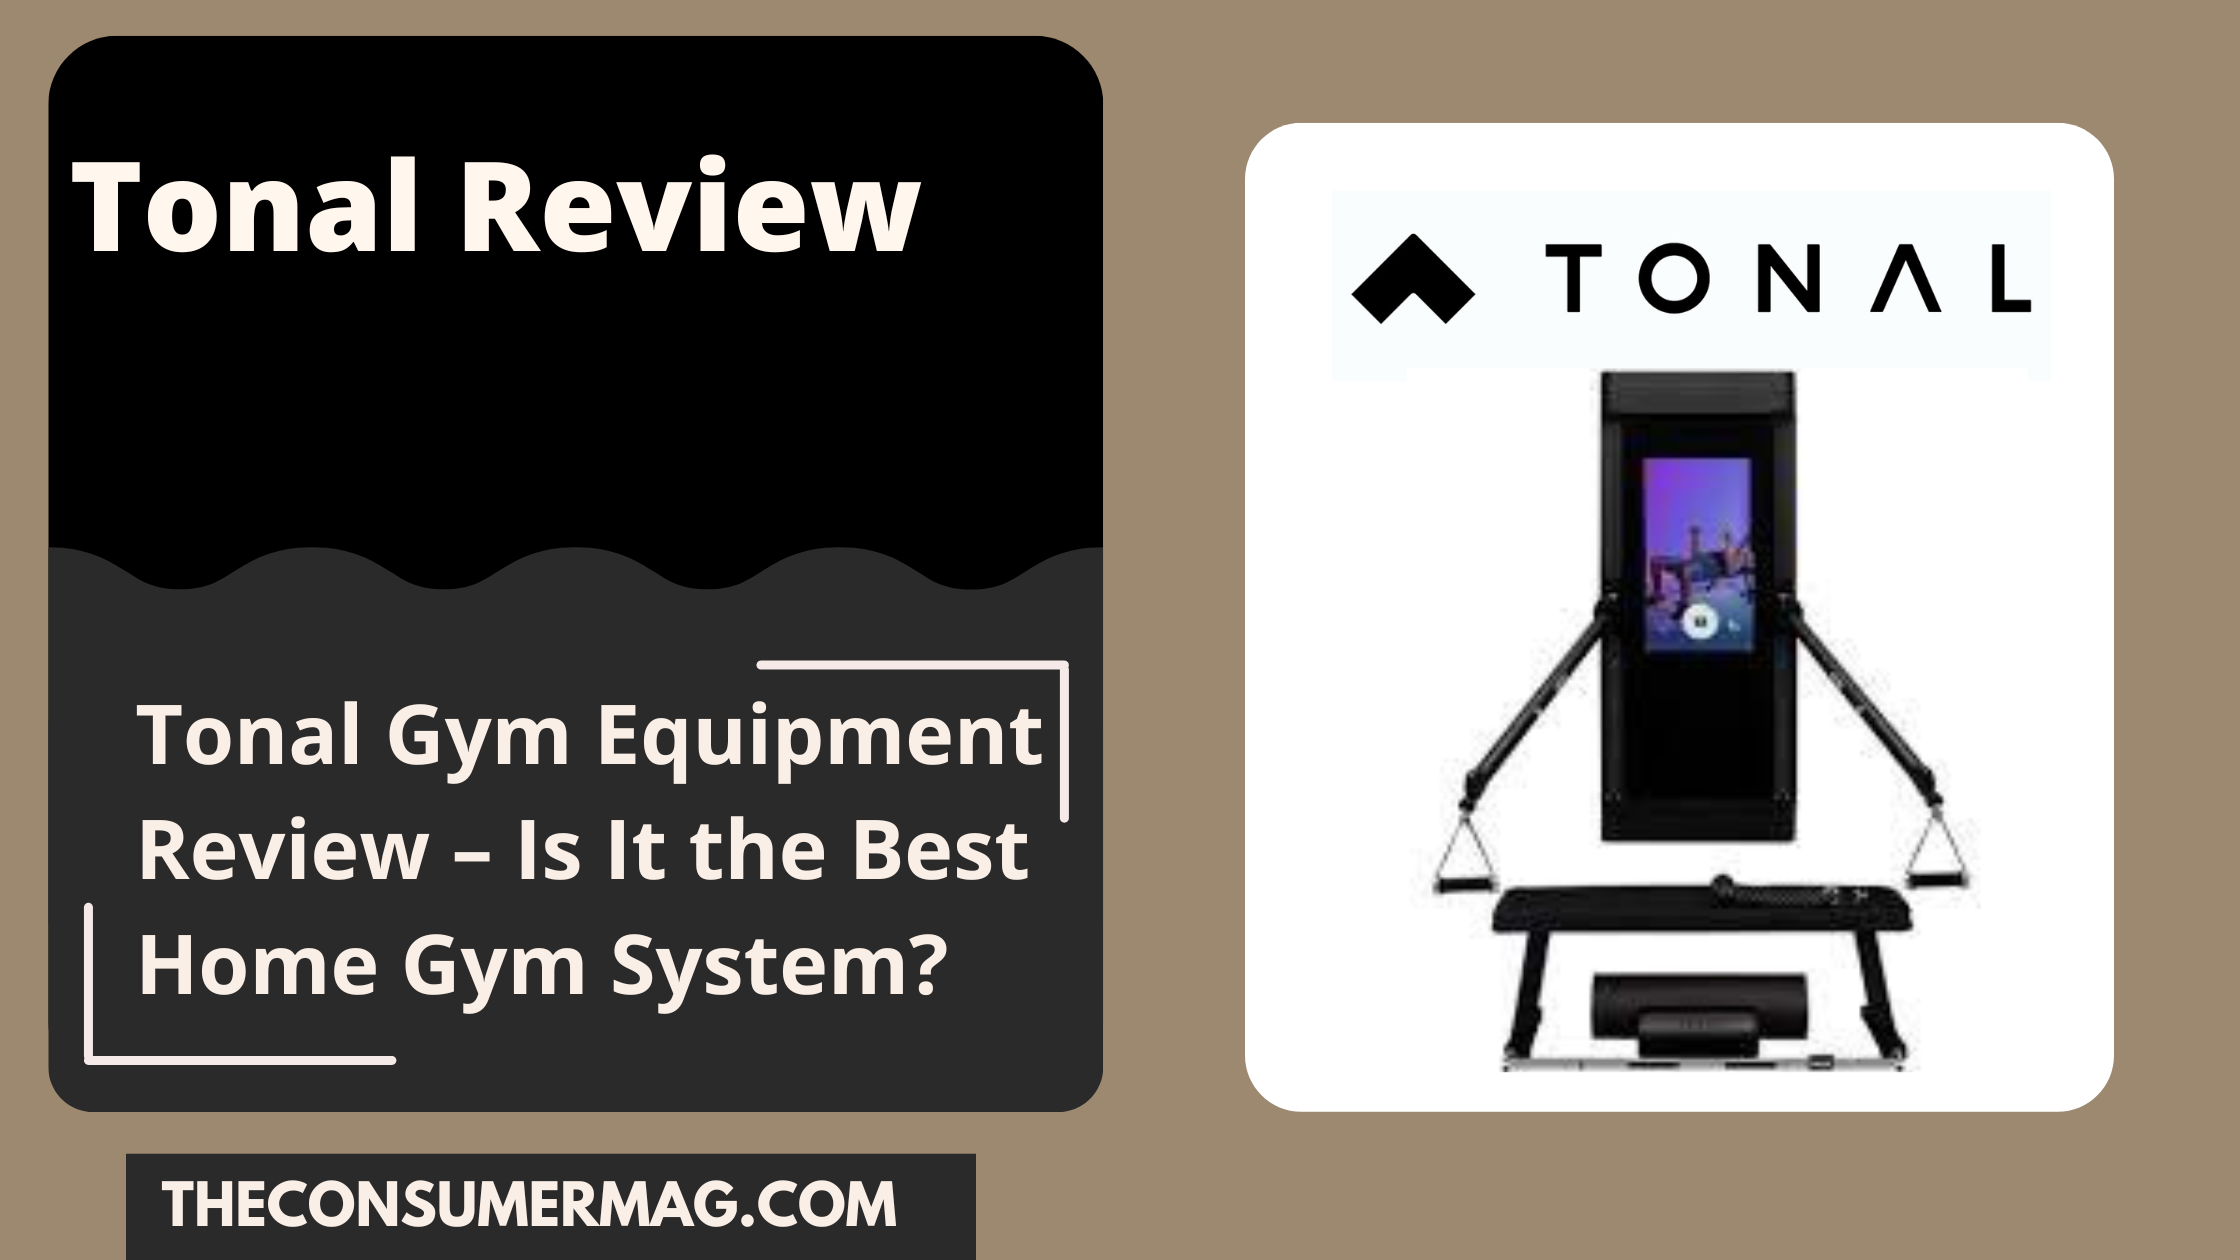 Tonal Gym Equipment featured image